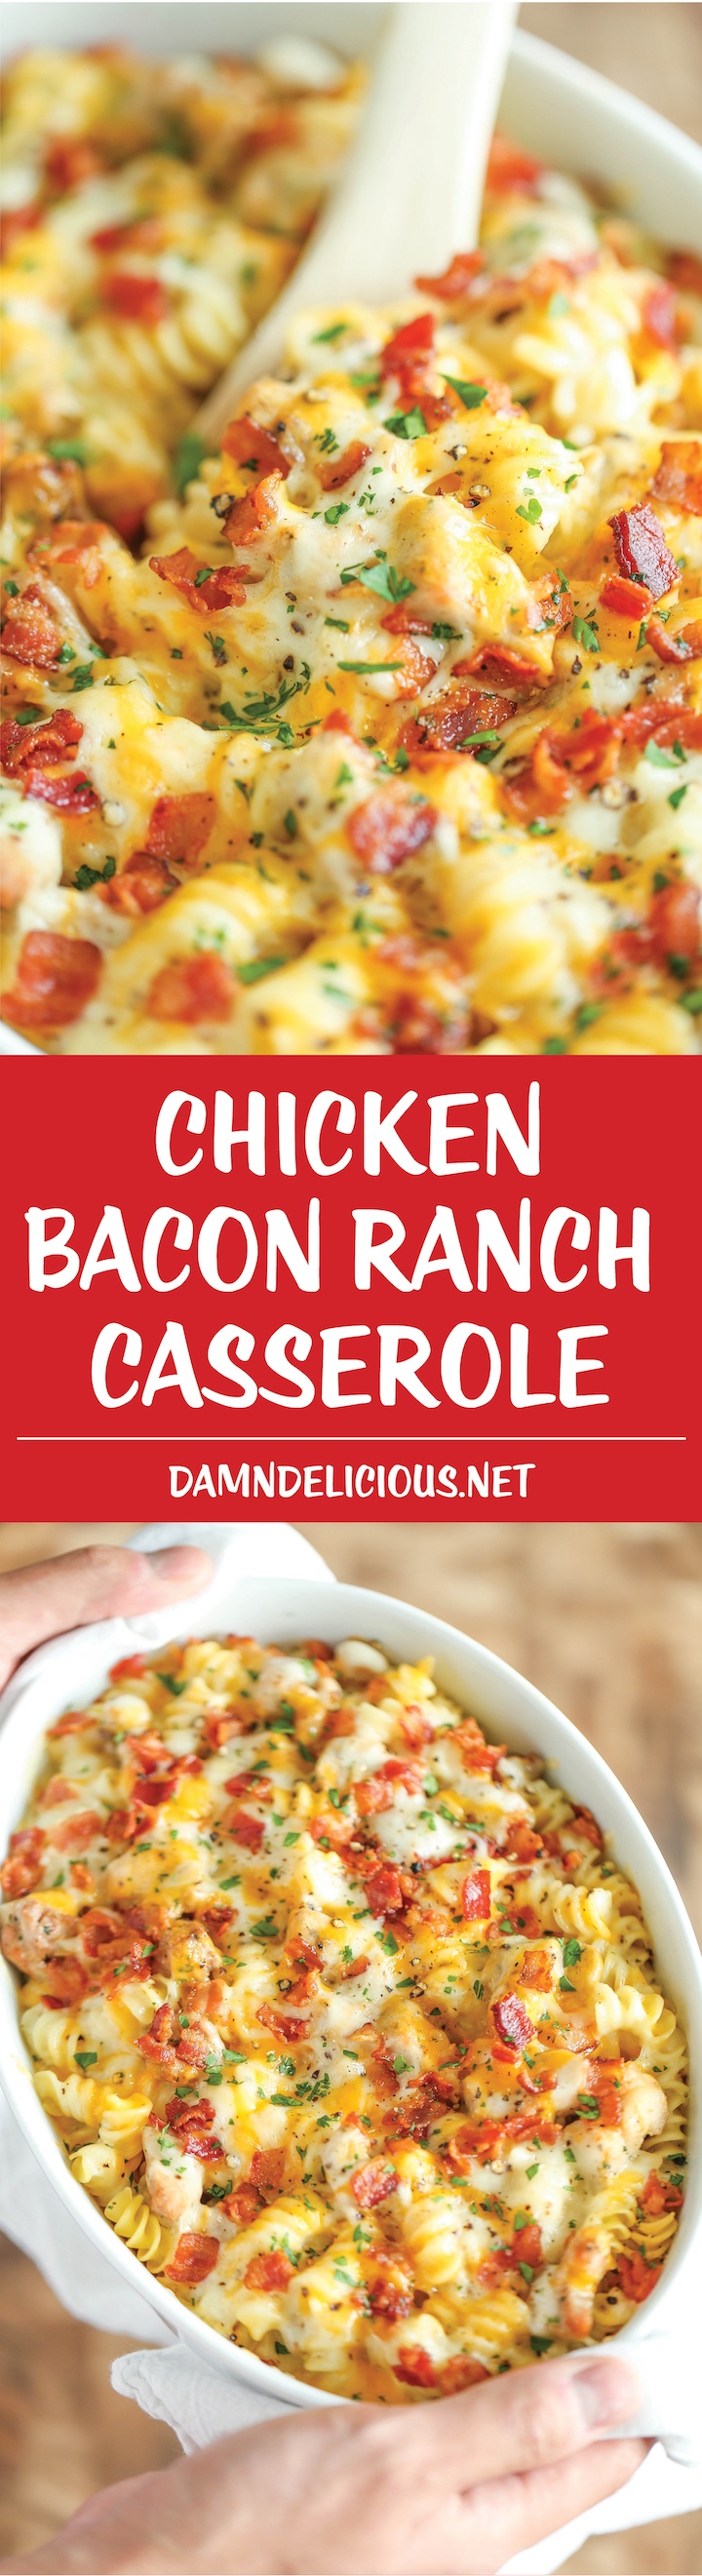 Chicken Bacon Ranch Casserole - Creamy, cheesy and comforting! Loaded with Ranch chicken, homemade alfredo sauce and bacon. Can be made ahead of time!